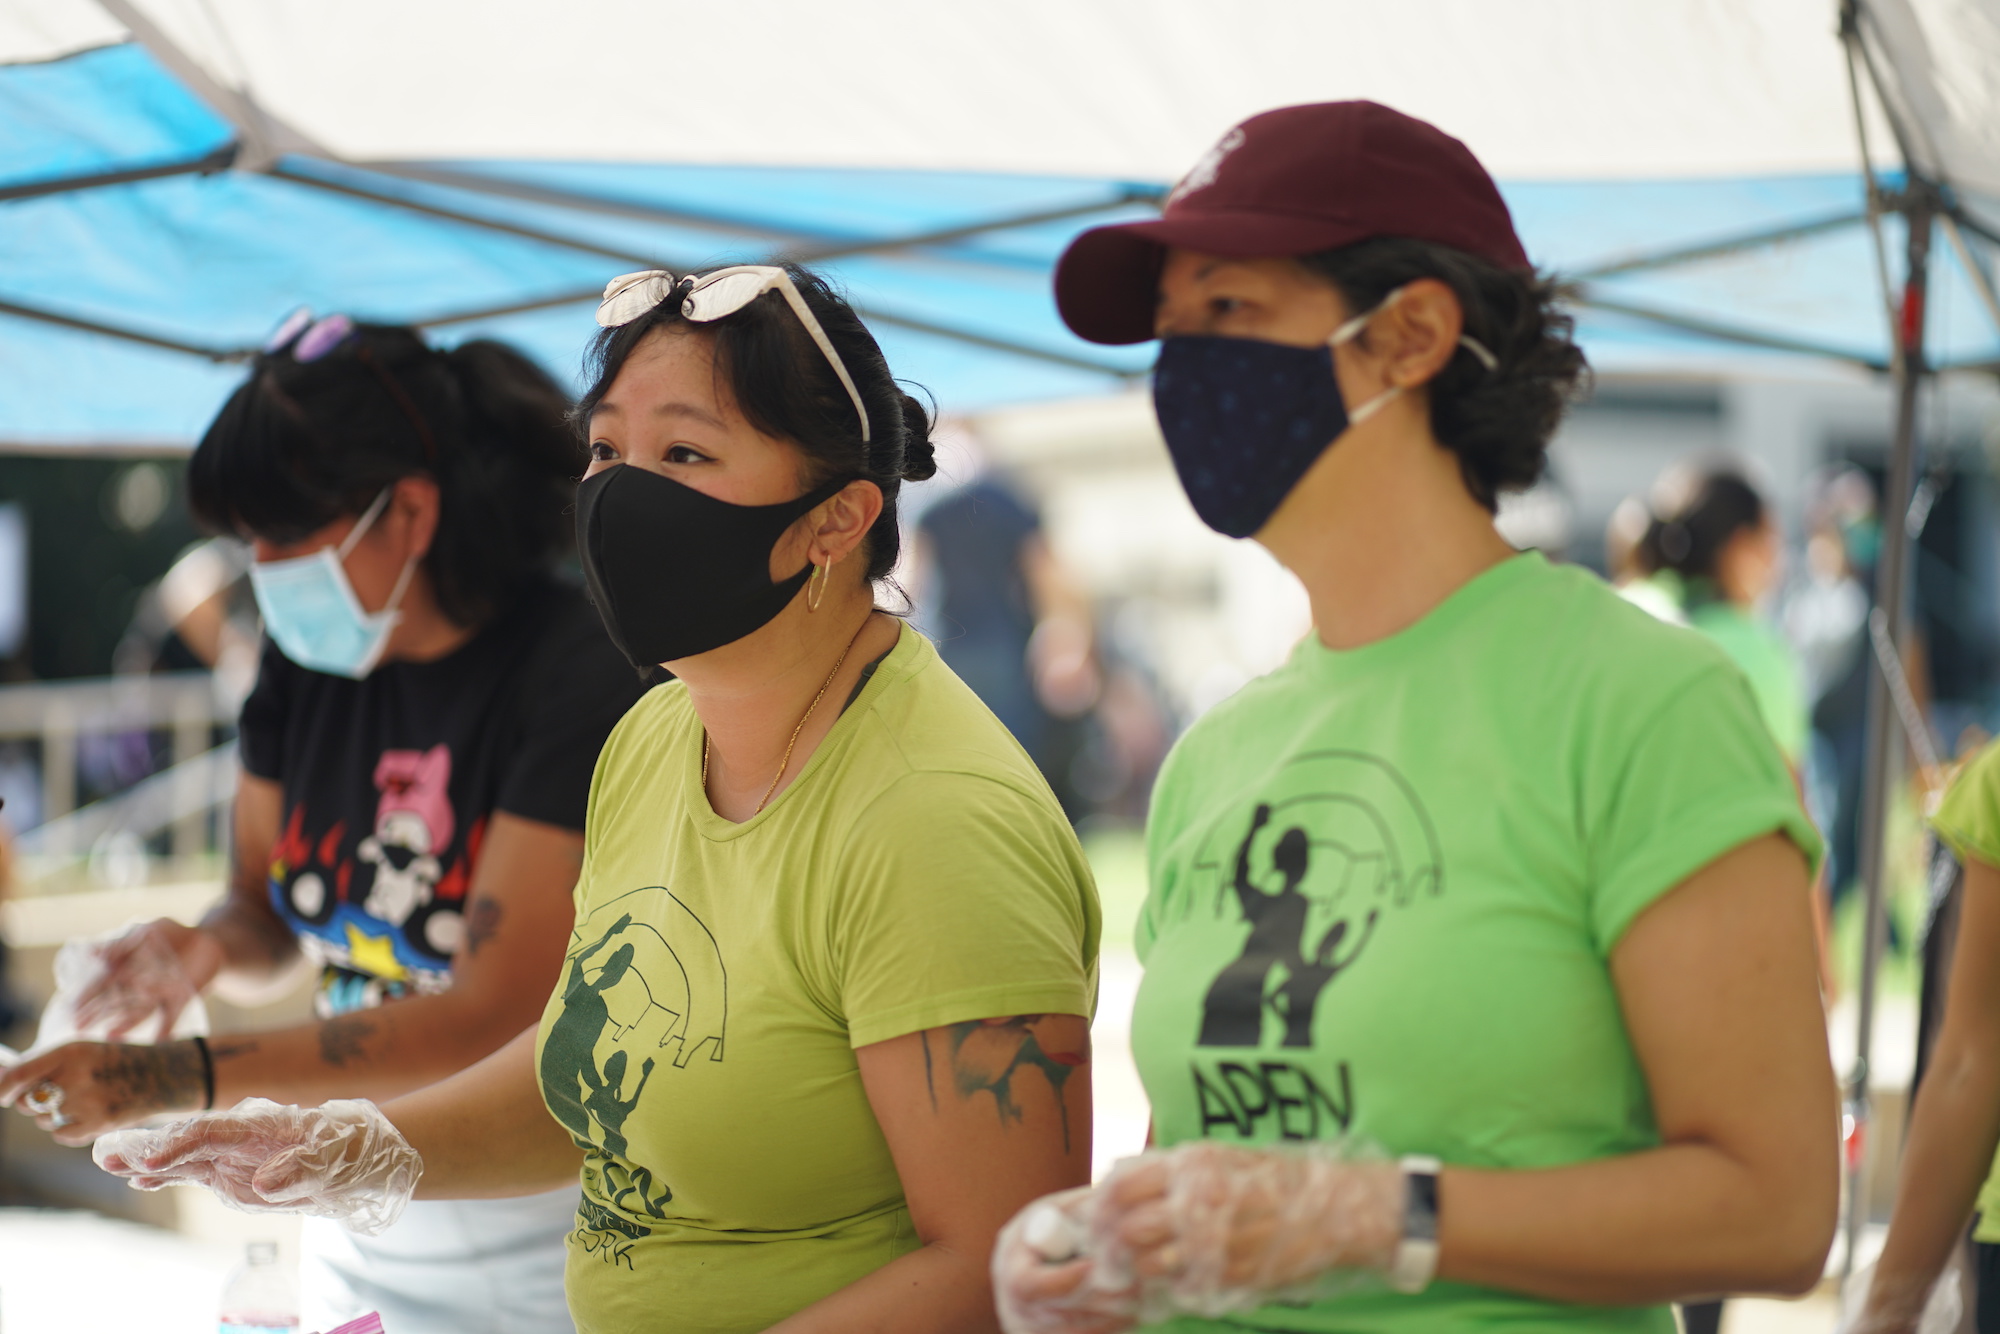 Two people in black face masks and green APEN t-shirts look to the left on the camera. They are wearing plastic gloves on their hands.